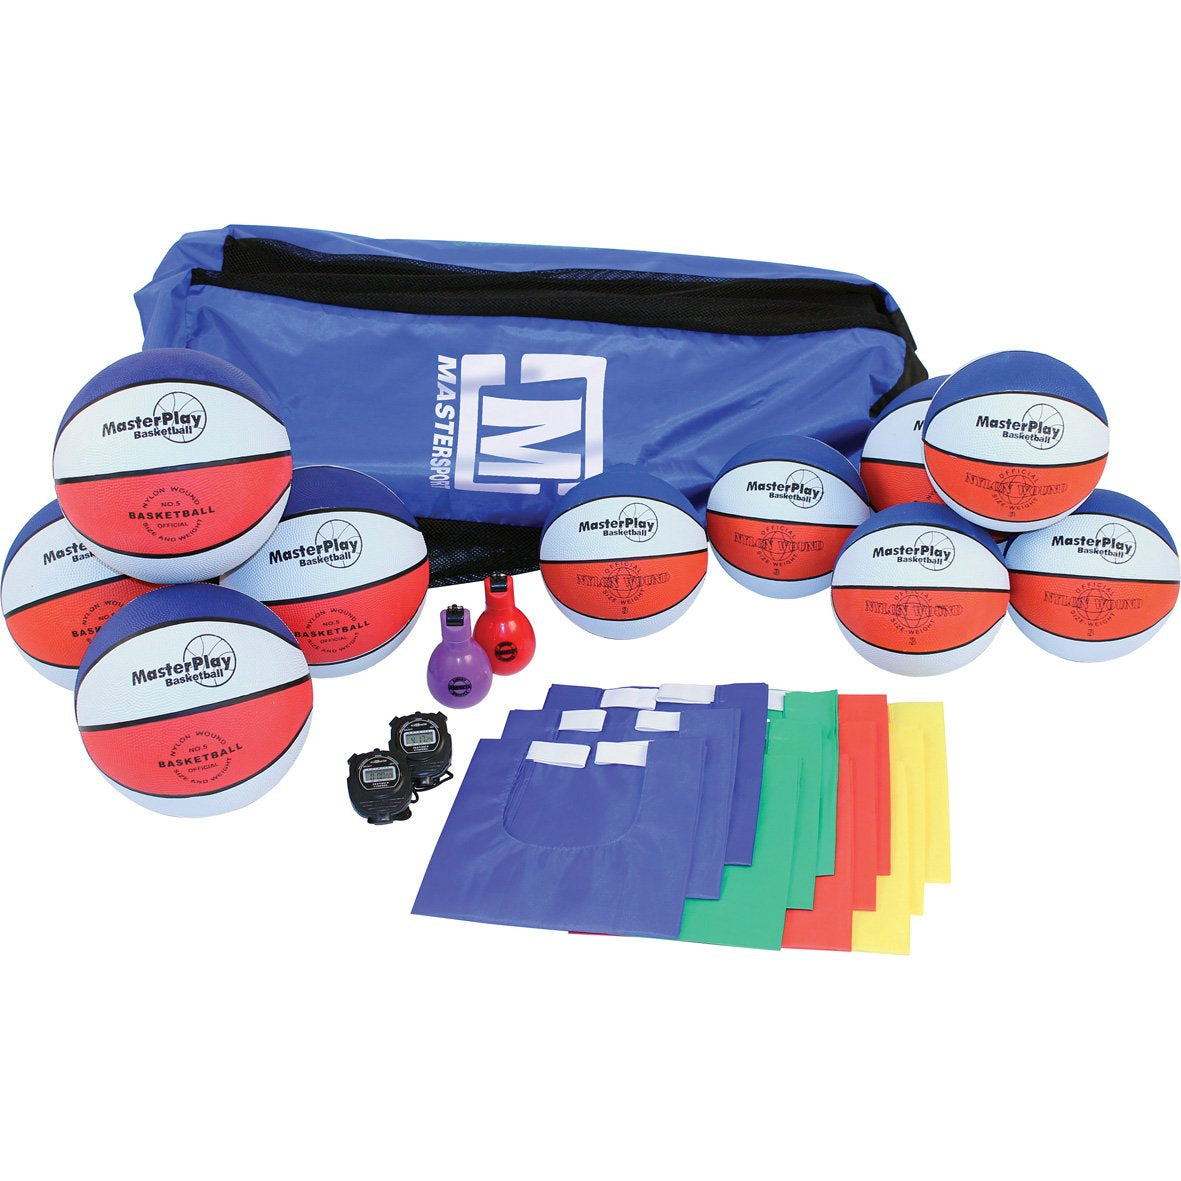 Mini-Basketball England Kit Take 6, Are you in search of an engaging game that encourages skill development and teamwork for mixed boys and girls groups? Look no further than the Mini-Basketball England Kit. This comprehensive kit is designed to promote maximum participation while introducing essential roles such as scorer, timekeeper, and referee. Key Components: Basketballs: The kit includes 10 basketballs, with 5 each of sizes 3 and 5. This variety allows players of different ages and skill levels to par